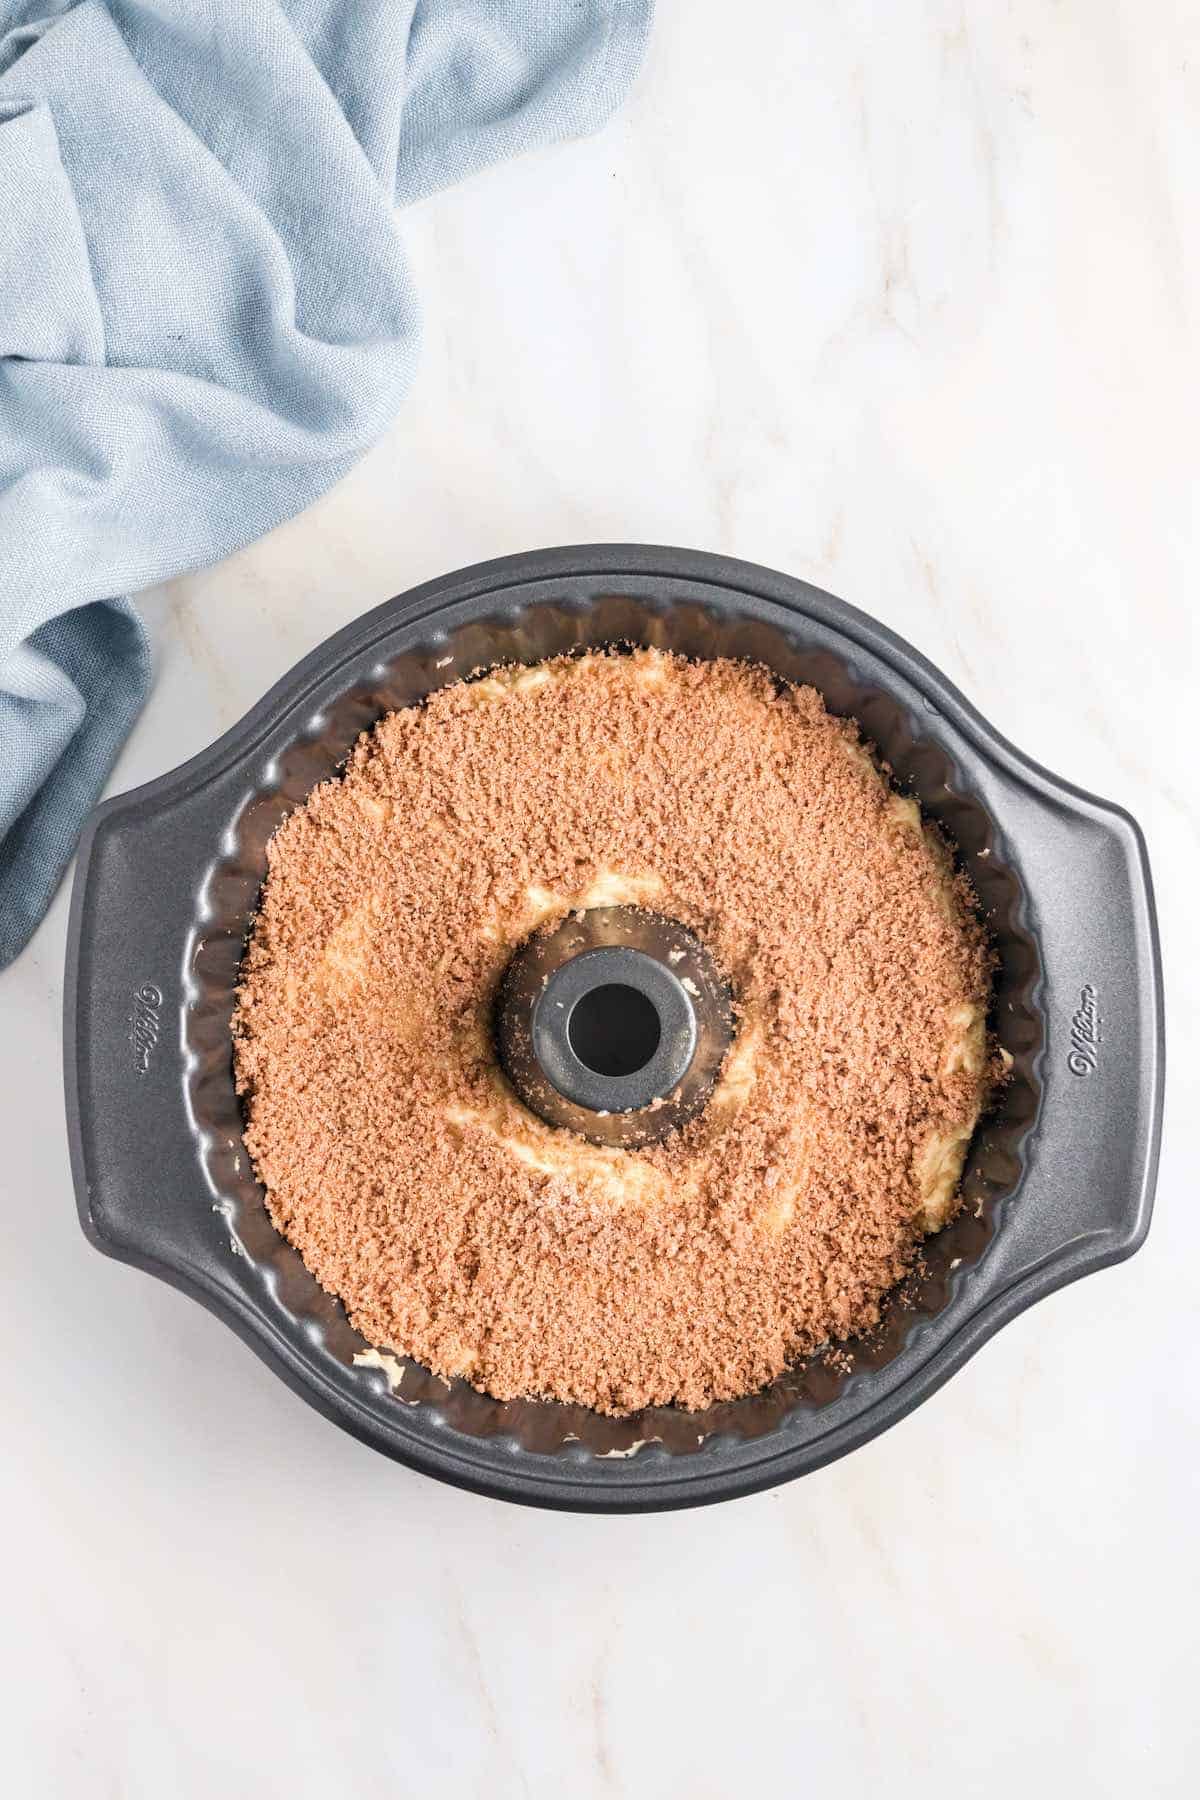 A sour cream bundt cake in a pan before baking.